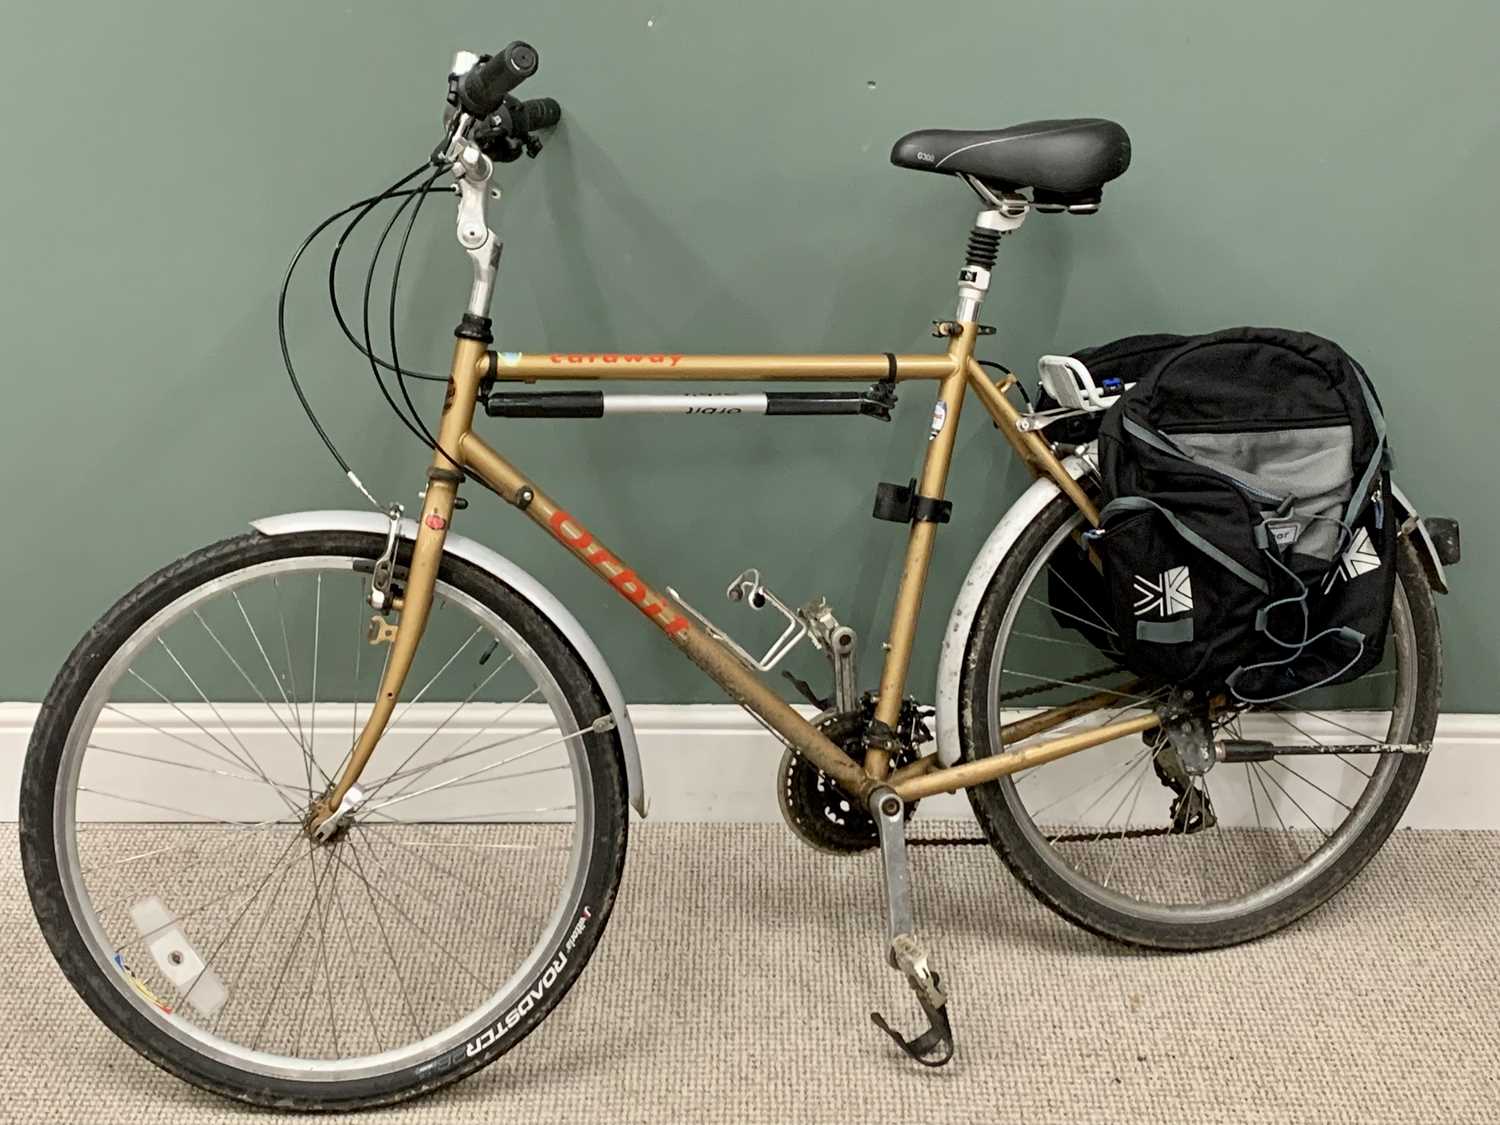 ORBIT CARAWAY BICYCLE, multi gear with rear panniers, 22-inch frame, 160cms approximate overall L - Image 5 of 5